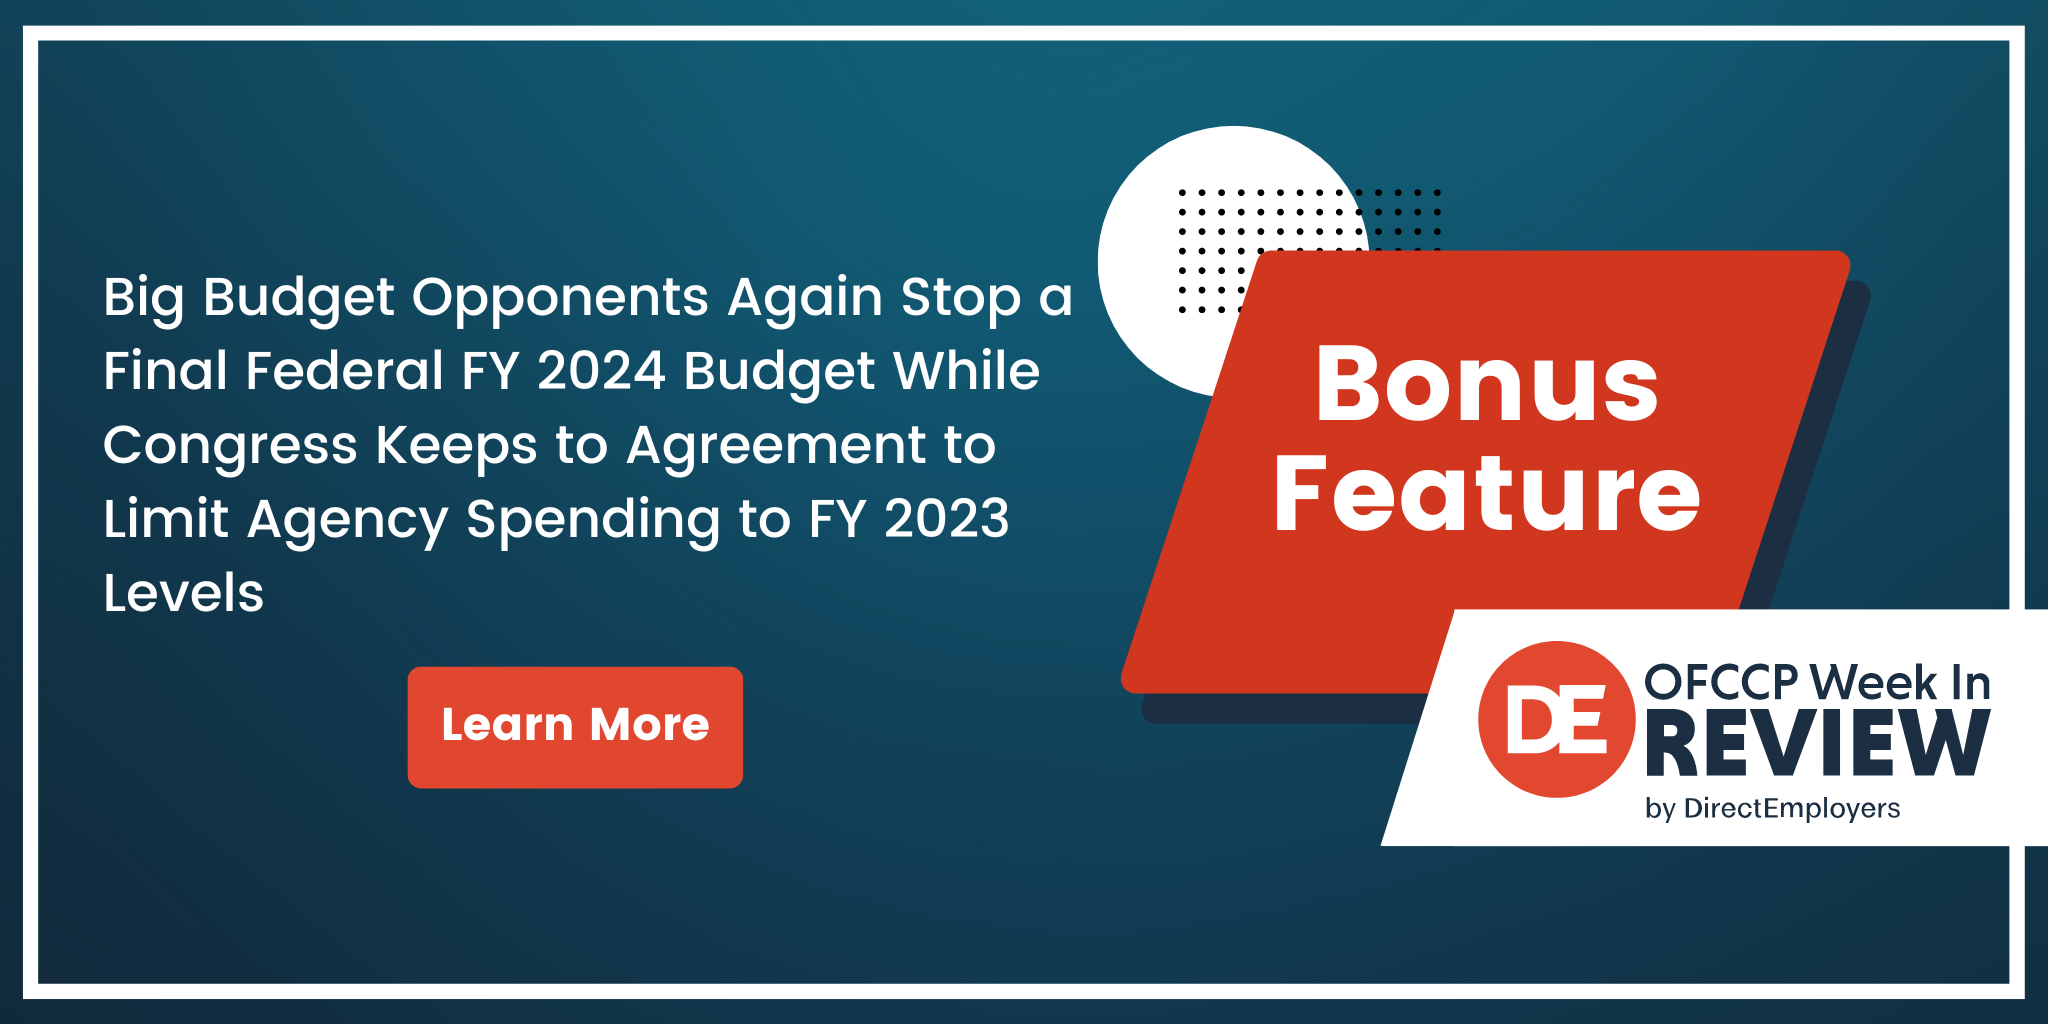 OFCCP Week In Review Bonus Feature | Big Budget Opponents Again Stop a Final Federal FY 2024 Budget While Congress Keeps to Agreement to Limit Agency Spending to FY 2023 Levels